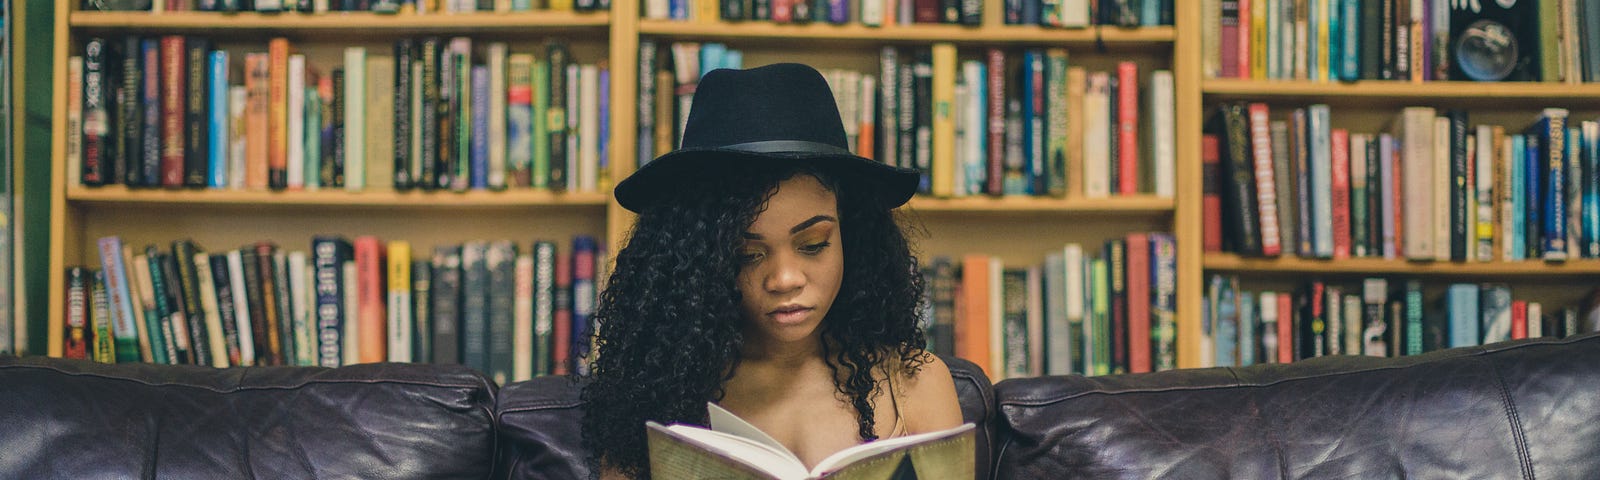 girl wearing a hat and reading a book on a couch, with bookshelves in the background